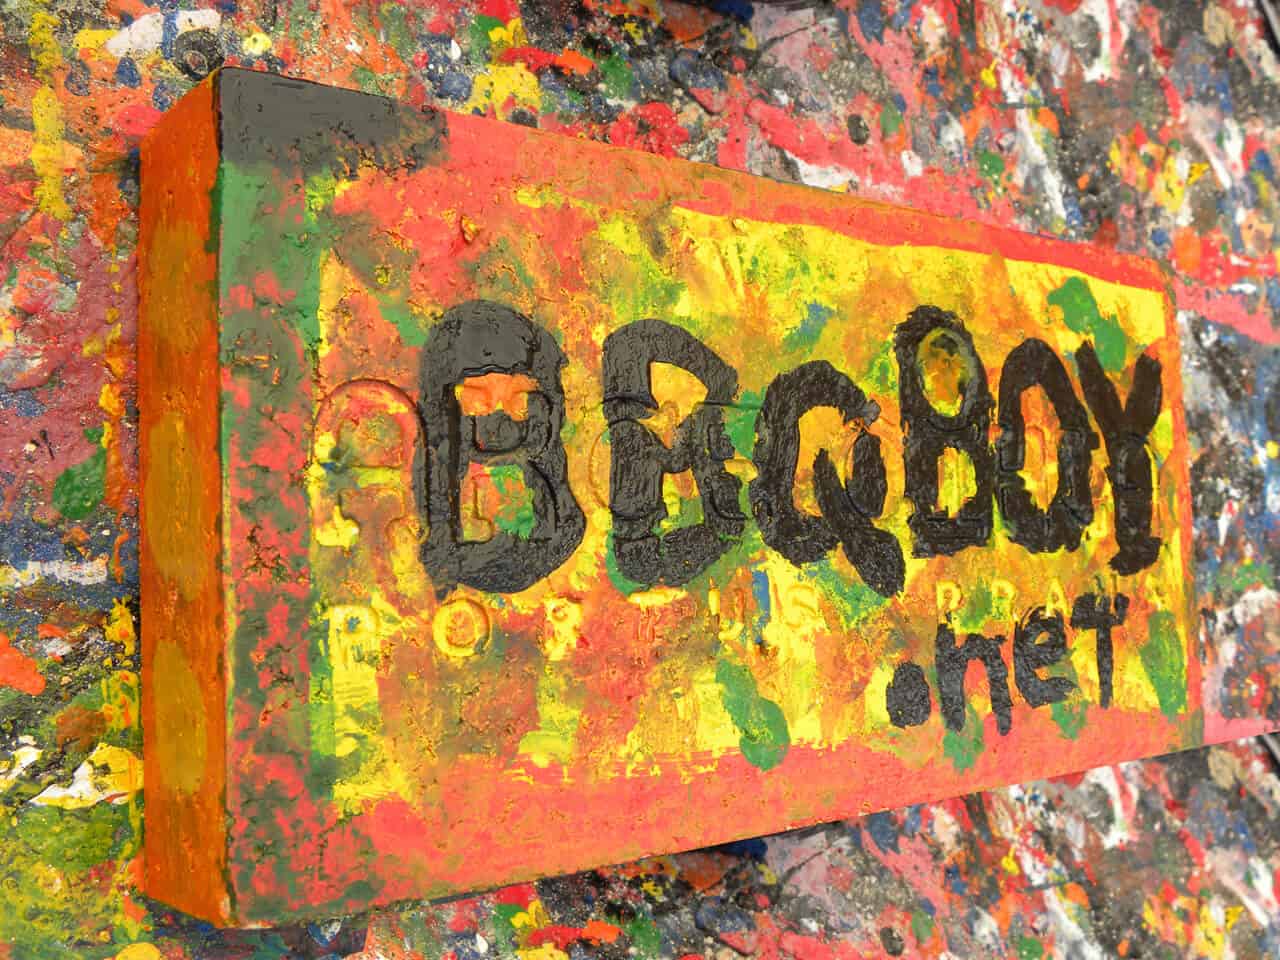 Prague – Painting a Brick for a good cause